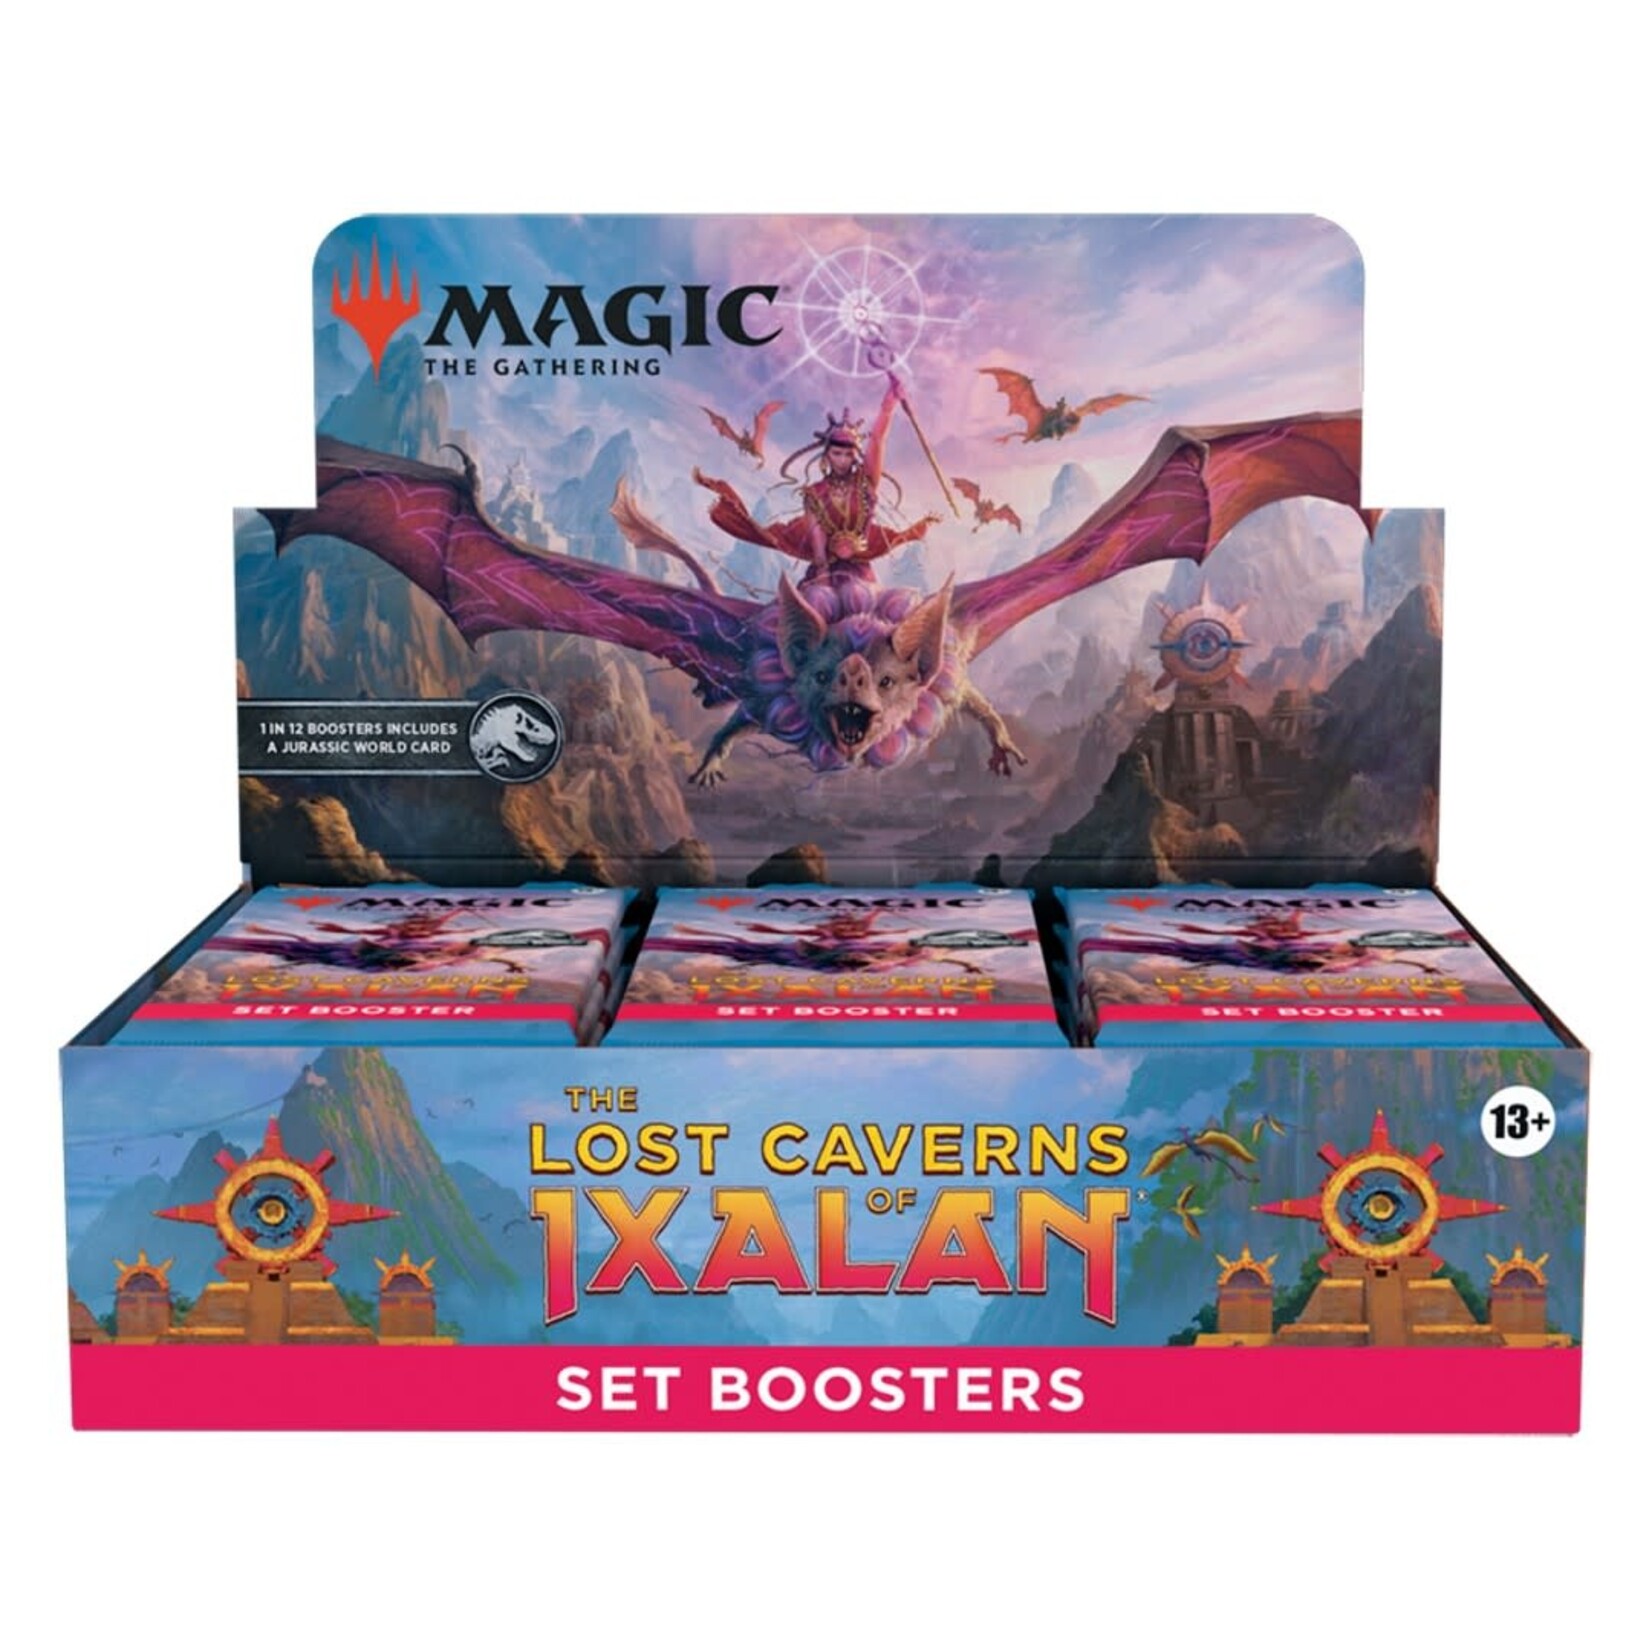 Wizards of the Coast Magic the Gathering Lost Caverns of Ixalan Set Booster Box